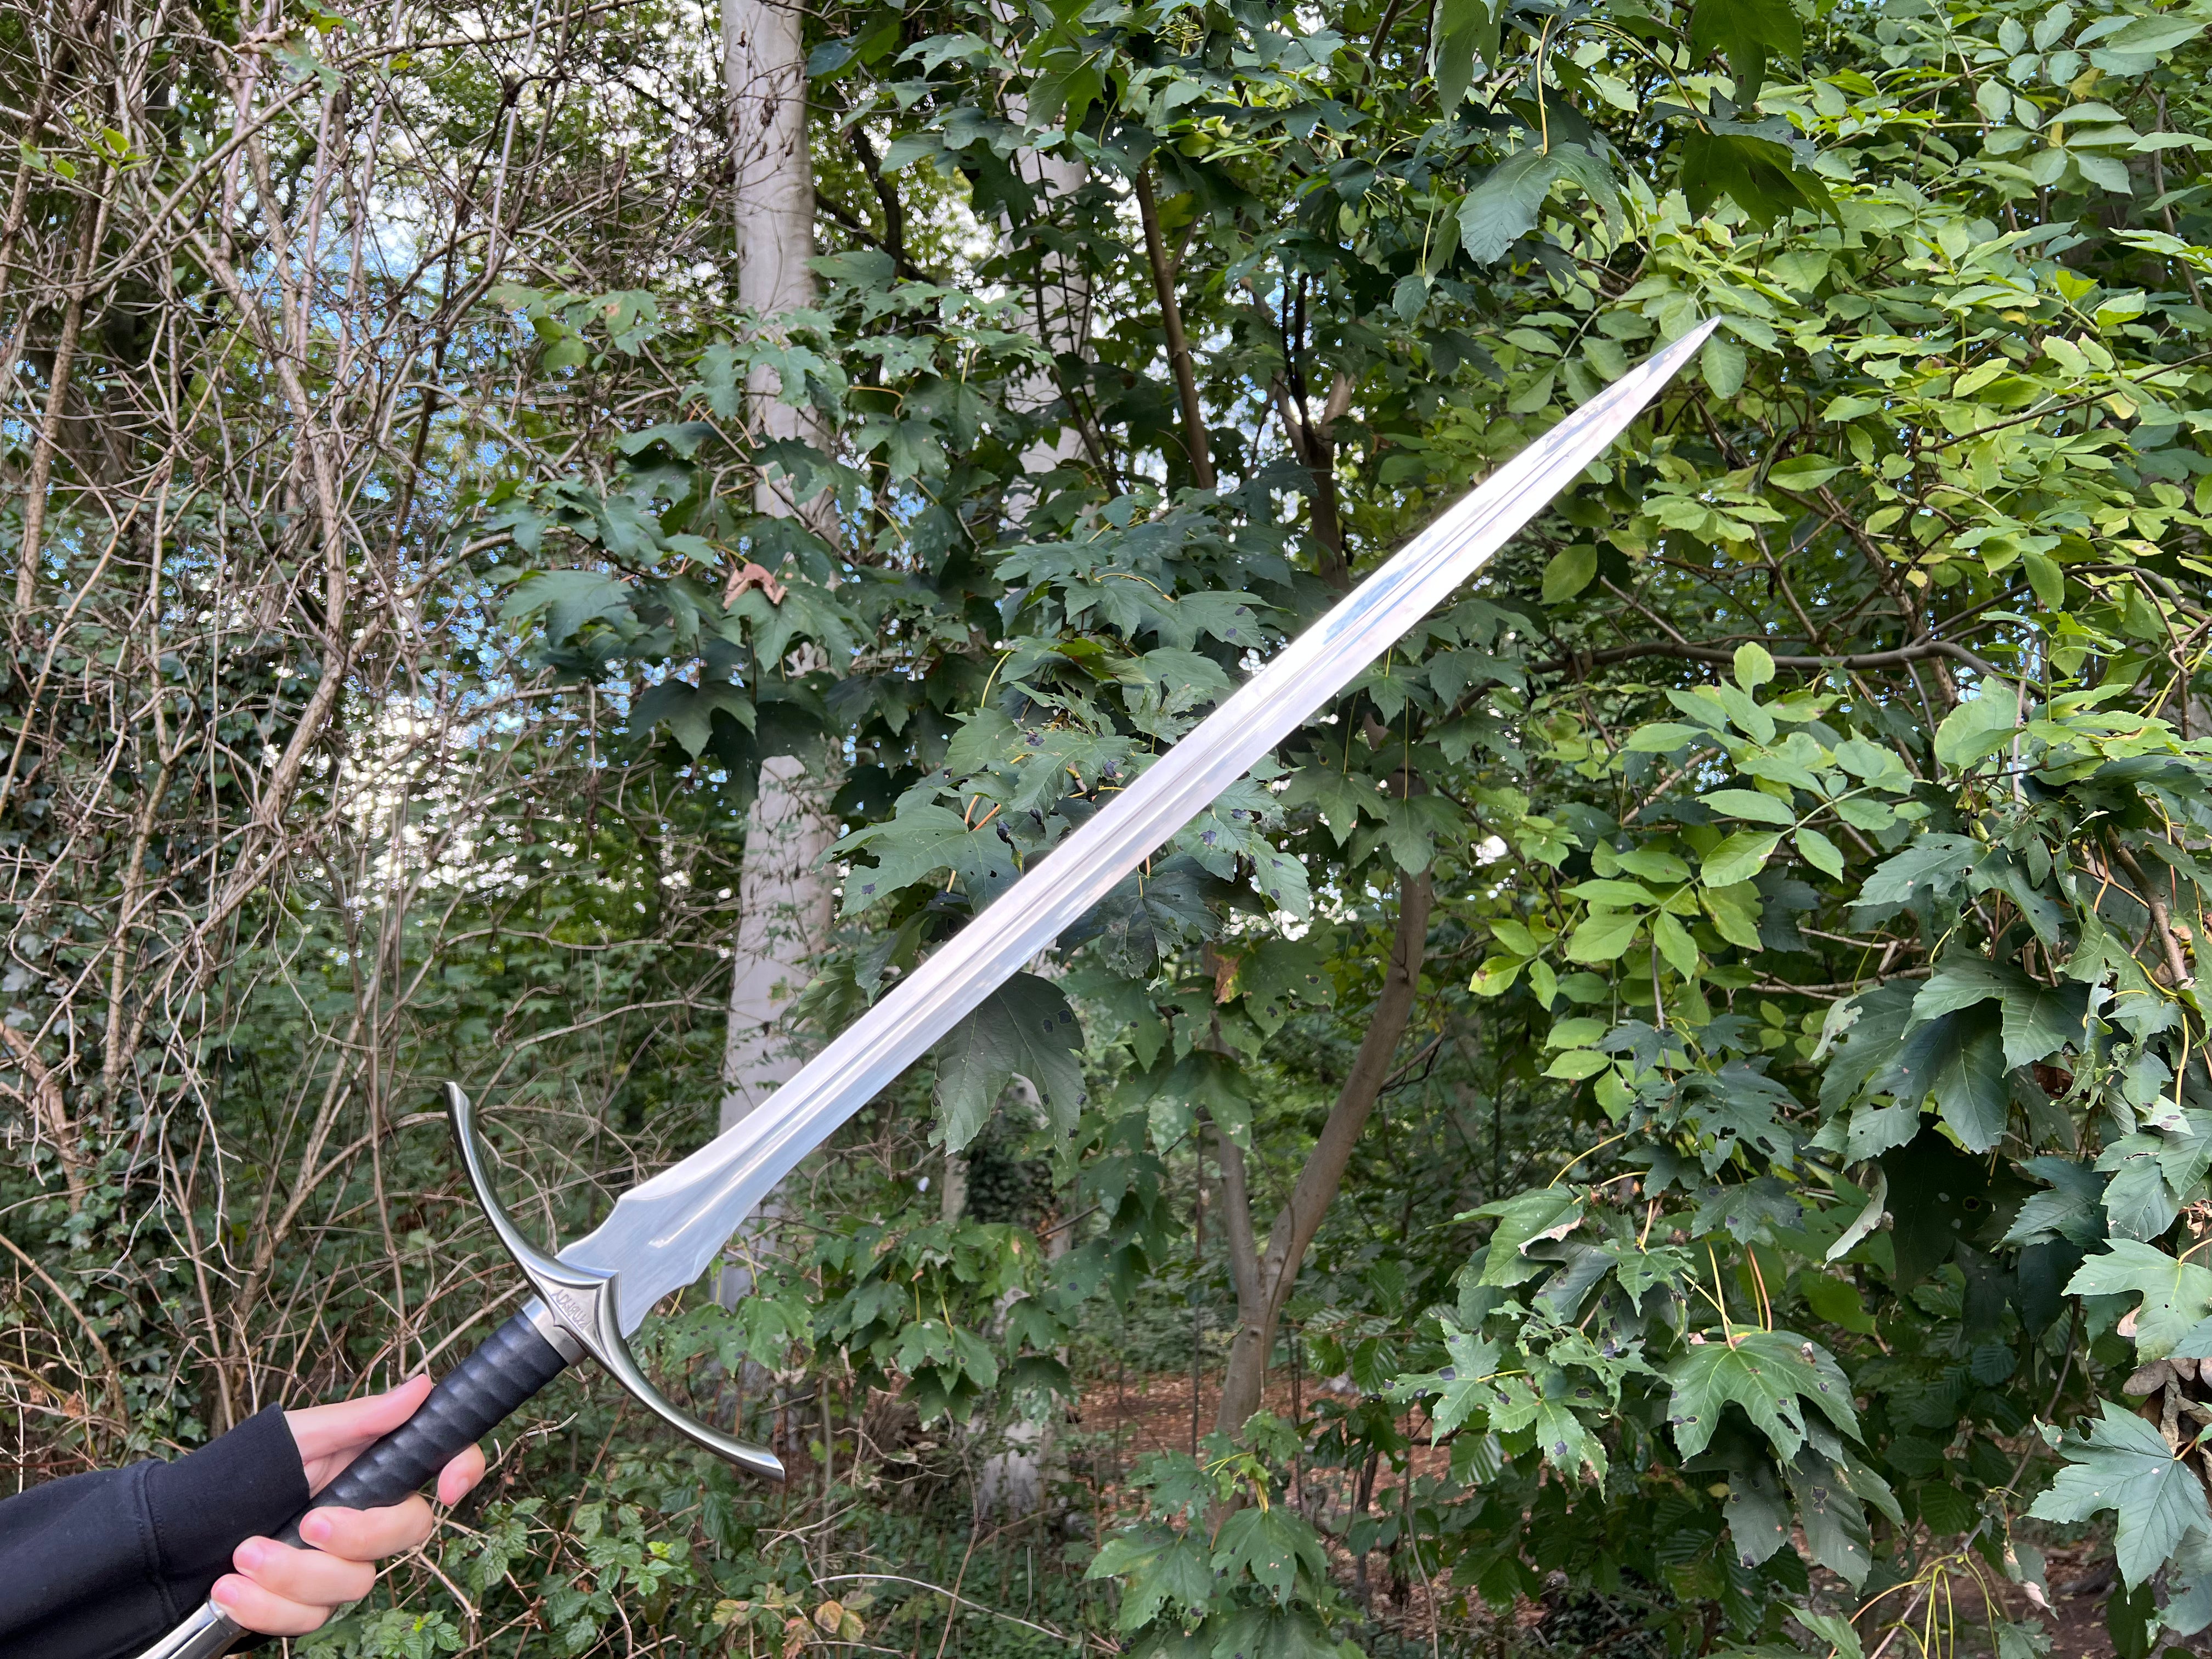 Gandalf's Sword Glamdring - Hobbit/Lord of the Rings